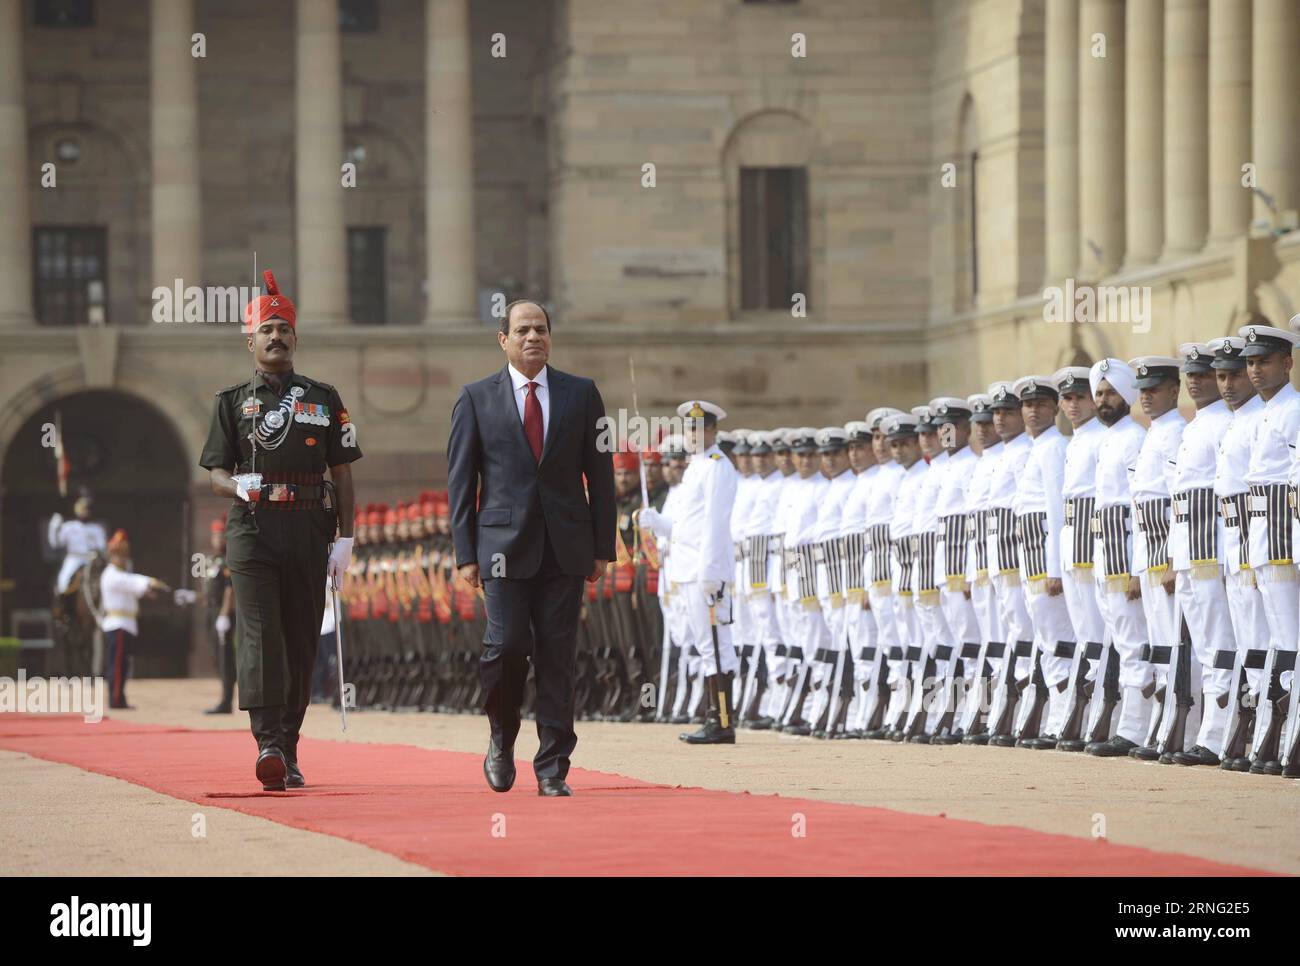 (160902) -- NEW DELHI, Sept. 2, 2016 -- Egyptian President Abdel Fattah al-Sisi (2nd L) inspects Indian guards of honor during the welcome ceremony at the Indian Presidential Palace in New Delhi, capital of India, Sept. 2, 2016. India and Egypt agreed on Friday to bolster their defense and security ties to deal with the growing threats of terrorism and radicalization. )(zw) INDIA-NEW DELHI-EGYPTIAN PRESIDENT-VISIT ParthaxSarkar PUBLICATIONxNOTxINxCHN   160902 New Delhi Sept 2 2016 Egyptian President Abdel Fattah Al Sisi 2nd l inspect Indian Guards of HONOR during The Welcome Ceremony AT The In Stock Photo